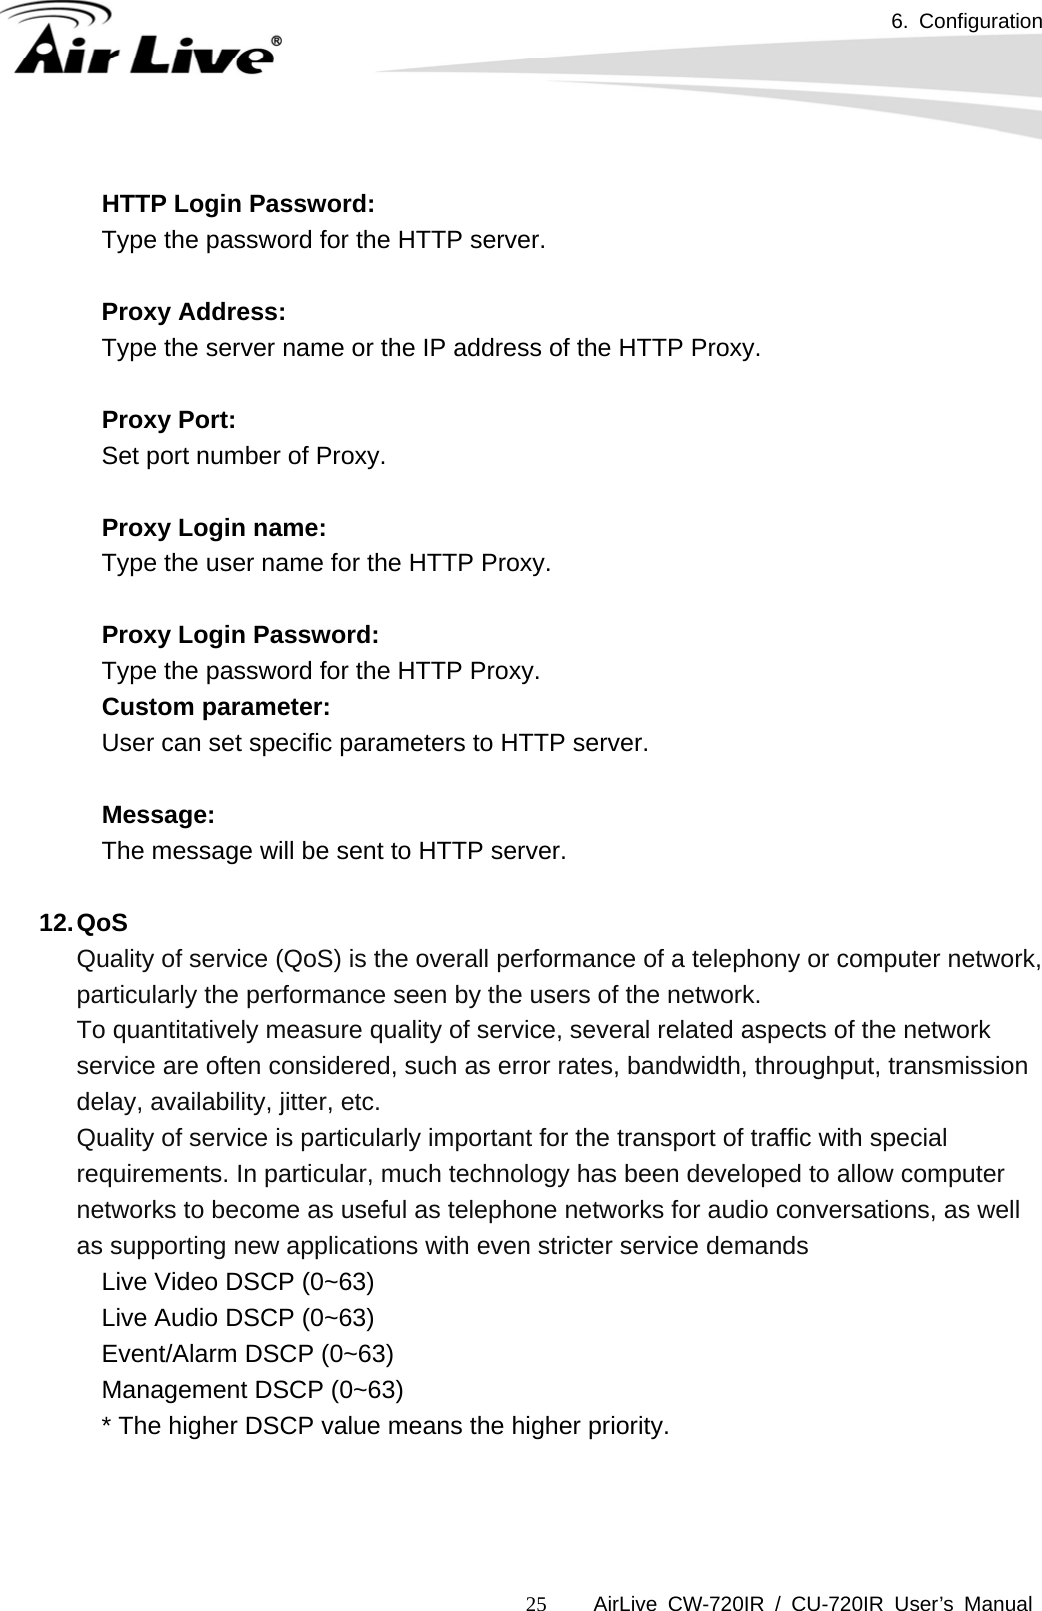 6. Configuration      AirLive CW-720IR / CU-720IR User’s Manual 25 HTTP Login Password:  Type the password for the HTTP server.    Proxy Address:  Type the server name or the IP address of the HTTP Proxy.    Proxy Port:  Set port number of Proxy.    Proxy Login name:  Type the user name for the HTTP Proxy.    Proxy Login Password:  Type the password for the HTTP Proxy. Custom parameter:  User can set specific parameters to HTTP server.    Message:  The message will be sent to HTTP server.  12. QoS Quality of service (QoS) is the overall performance of a telephony or computer network, particularly the performance seen by the users of the network. To quantitatively measure quality of service, several related aspects of the network service are often considered, such as error rates, bandwidth, throughput, transmission delay, availability, jitter, etc. Quality of service is particularly important for the transport of traffic with special requirements. In particular, much technology has been developed to allow computer networks to become as useful as telephone networks for audio conversations, as well as supporting new applications with even stricter service demands      Live Video DSCP (0~63)      Live Audio DSCP (0~63)      Event/Alarm DSCP (0~63)      Management DSCP (0~63)      * The higher DSCP value means the higher priority.  